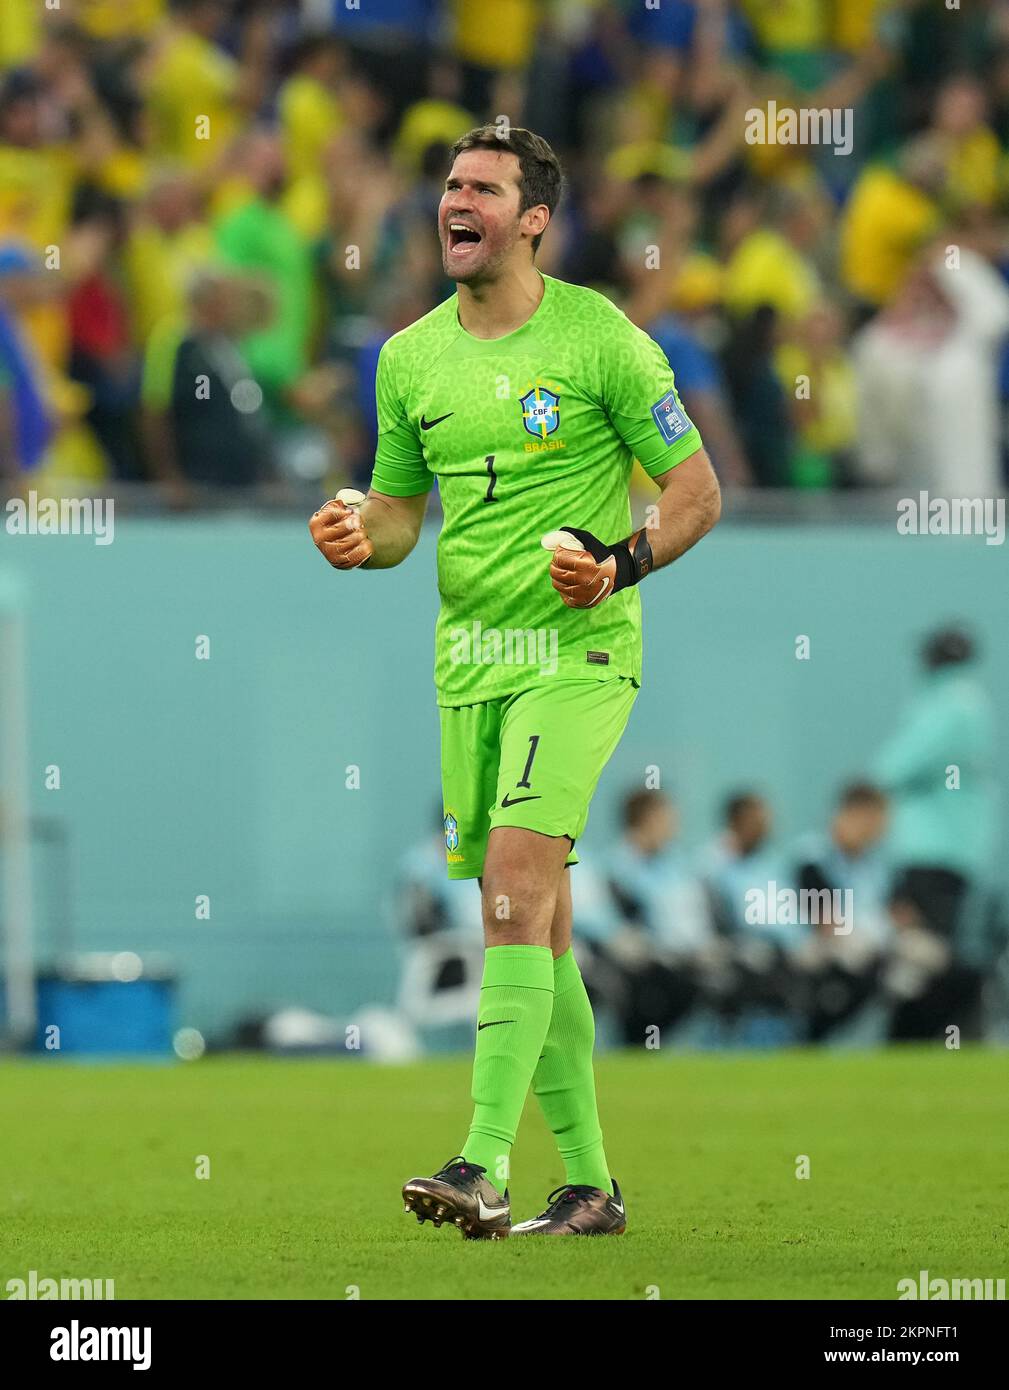 Brazil team group hi-res stock photography and images - Alamy